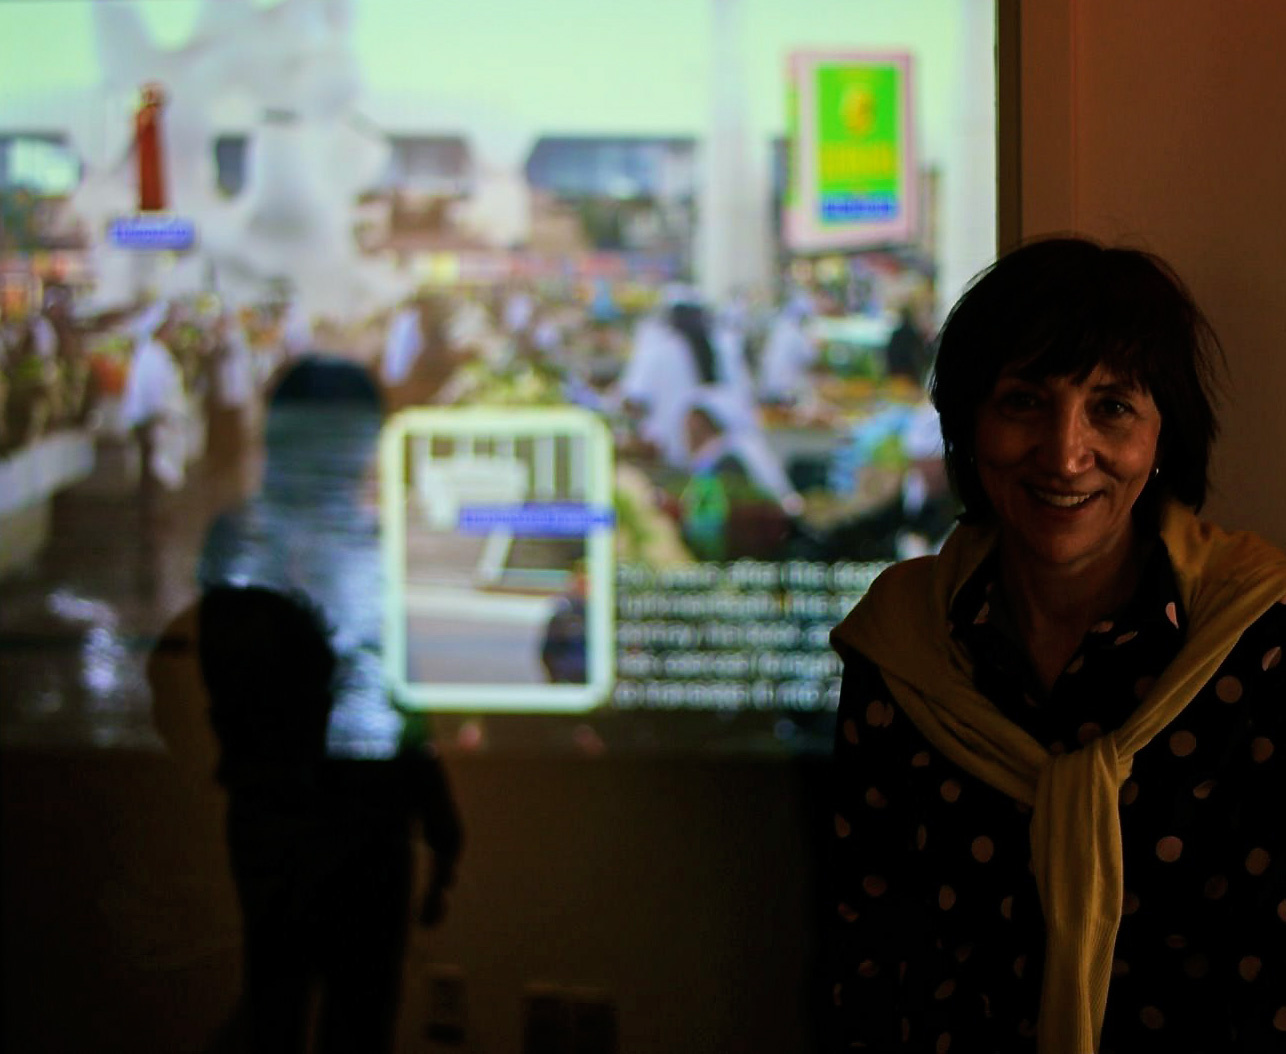 A woman standing in front of a canvas which shows a desktop with open programs